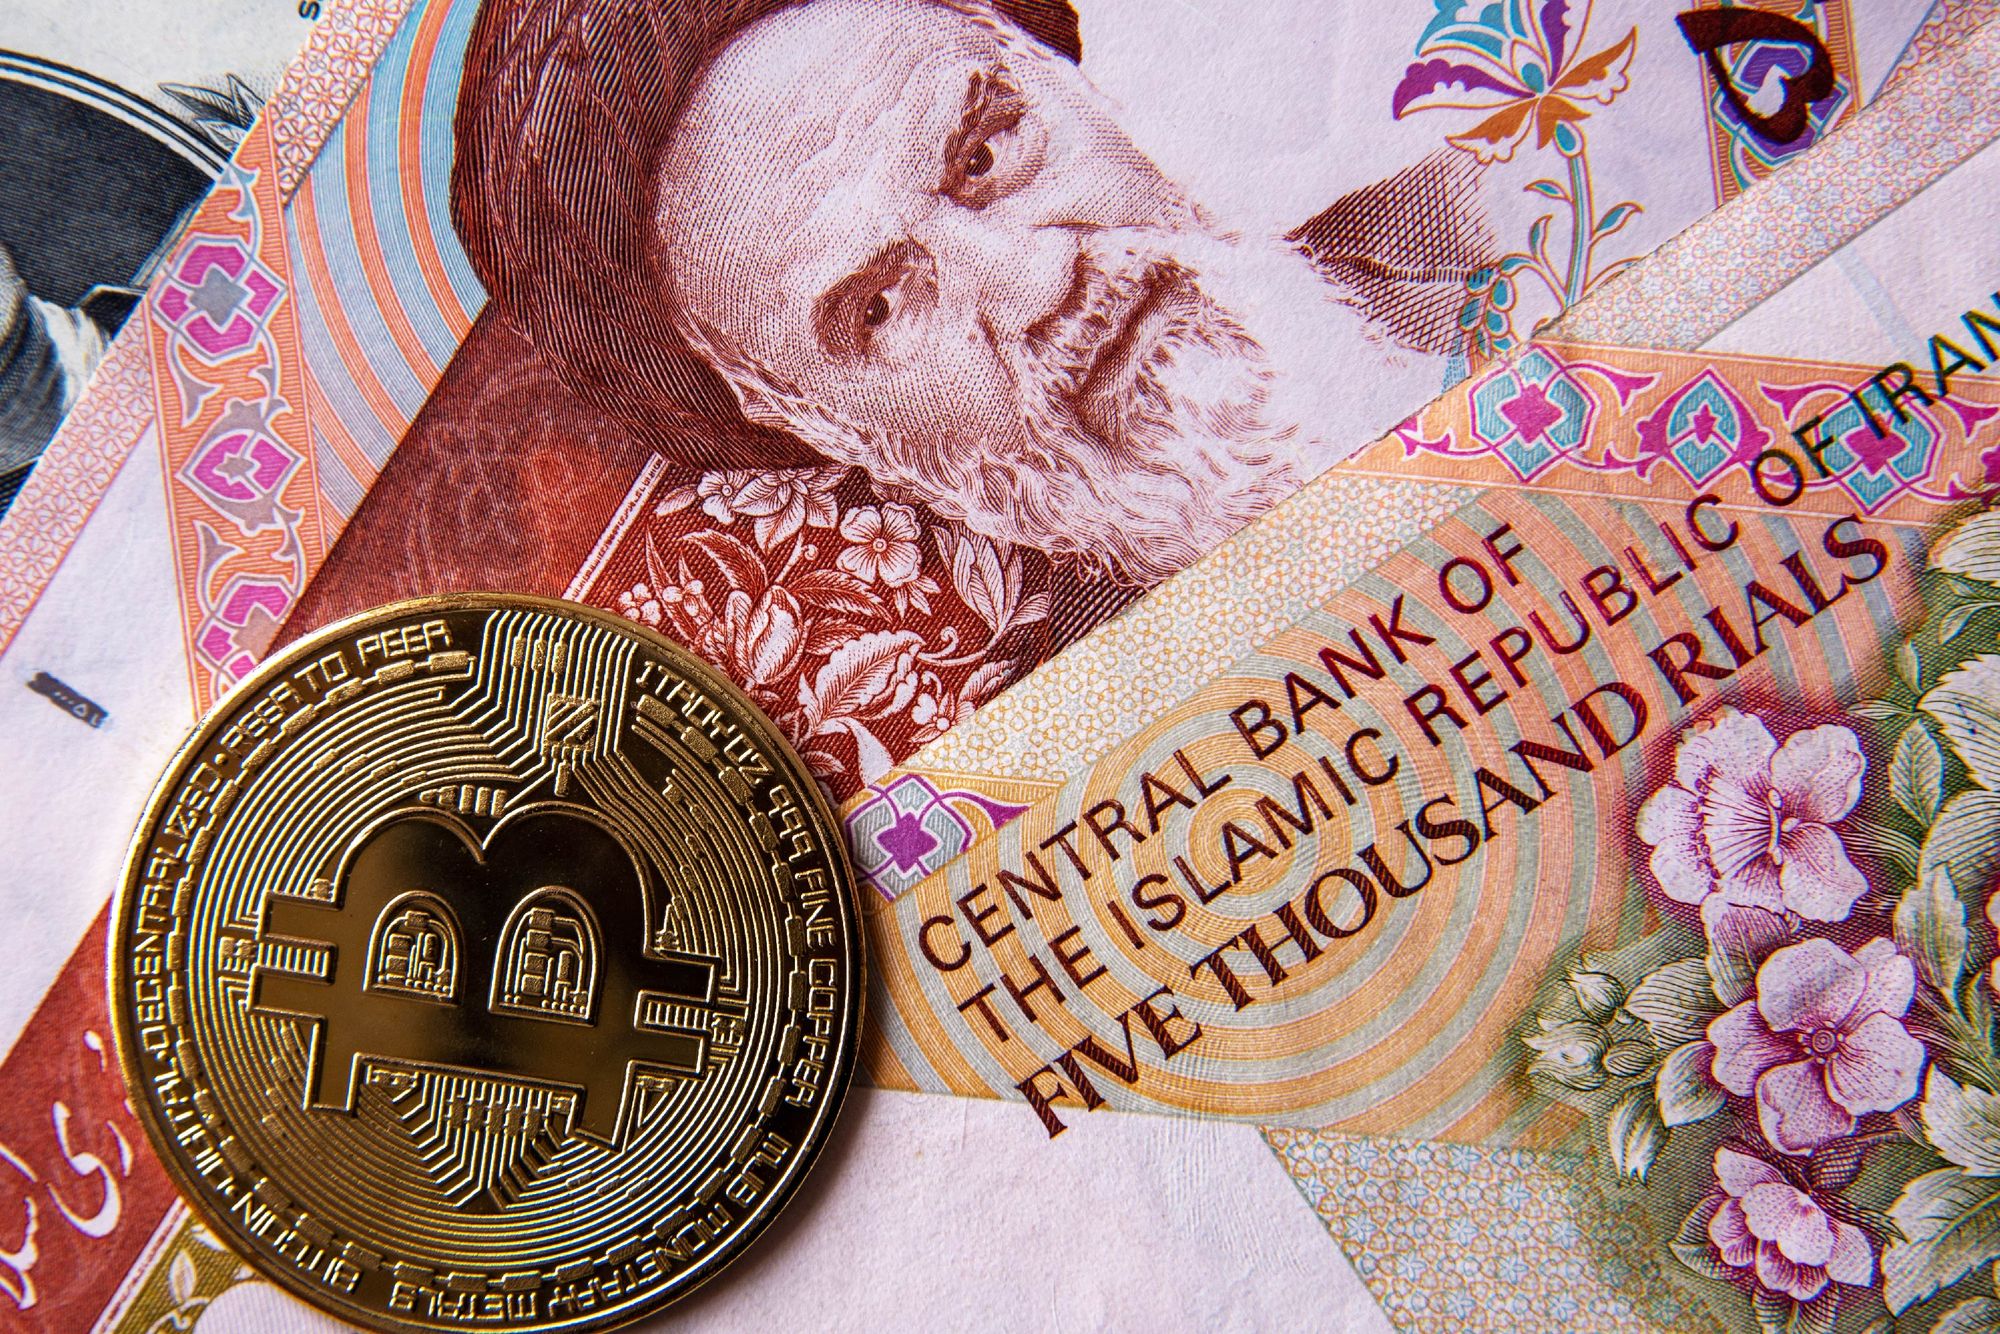 Iran has issued up to 30 licenses for crypto mining farms